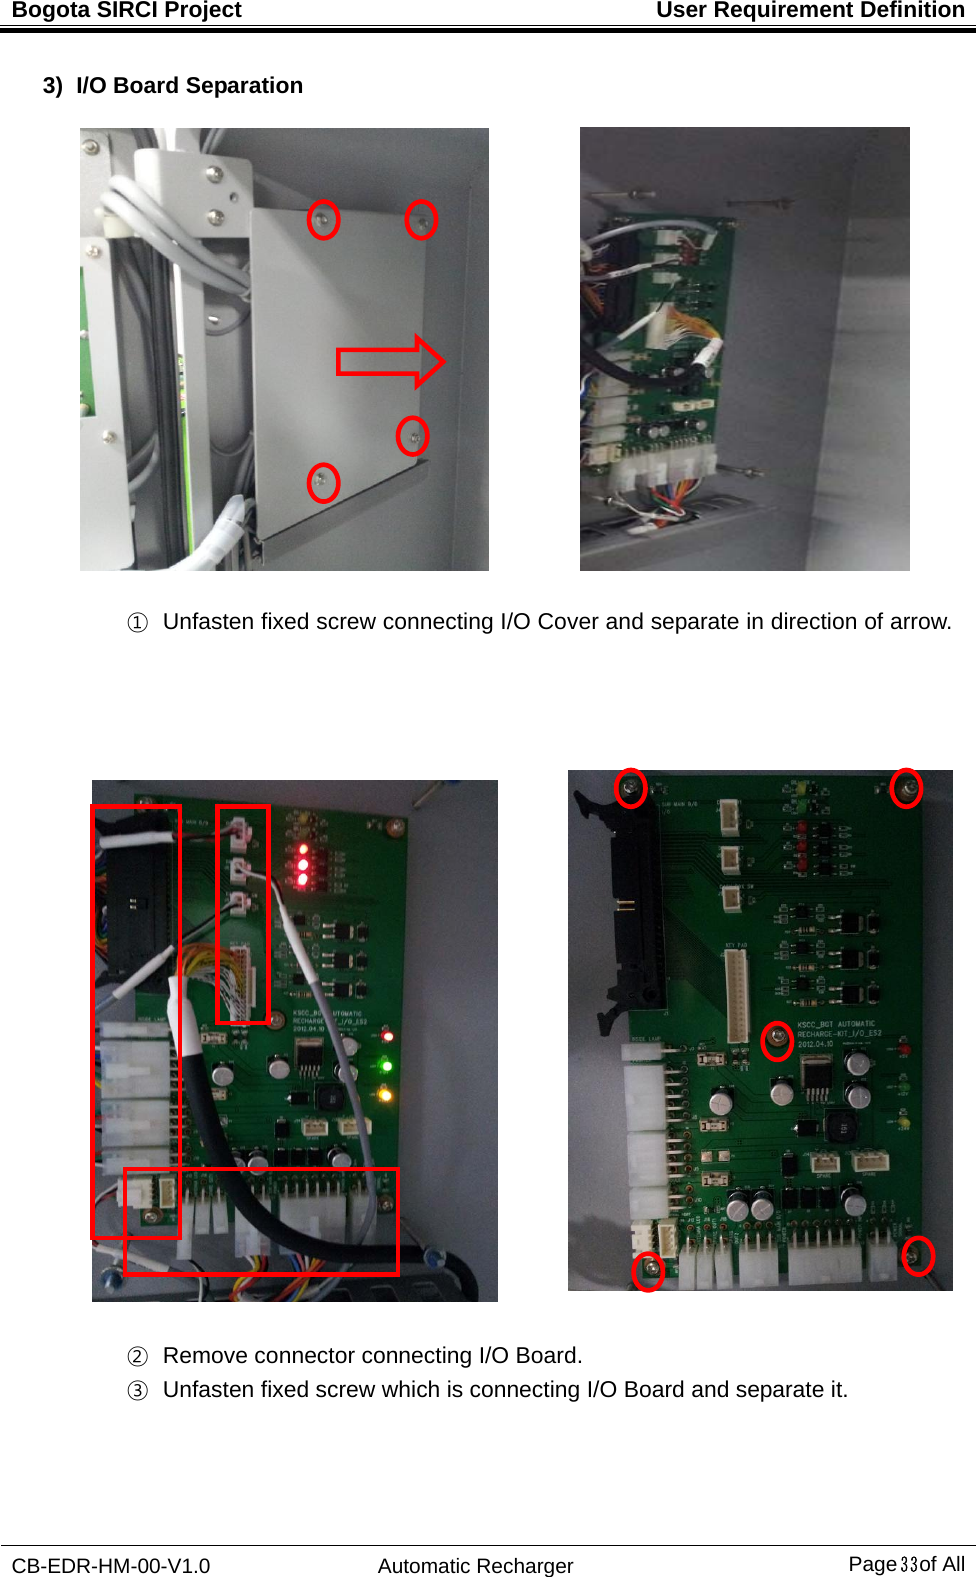 Bogota SIRCI Project  User Requirement Definition CB-EDR-HM-00-V1.0 Automatic Recharger Page３３ of All 3)  I/O Board Separation             ①   Unfasten fixed screw connecting I/O Cover and separate in direction of arrow.                                     ②   Remove connector connecting I/O Board. ③   Unfasten fixed screw which is connecting I/O Board and separate it. 